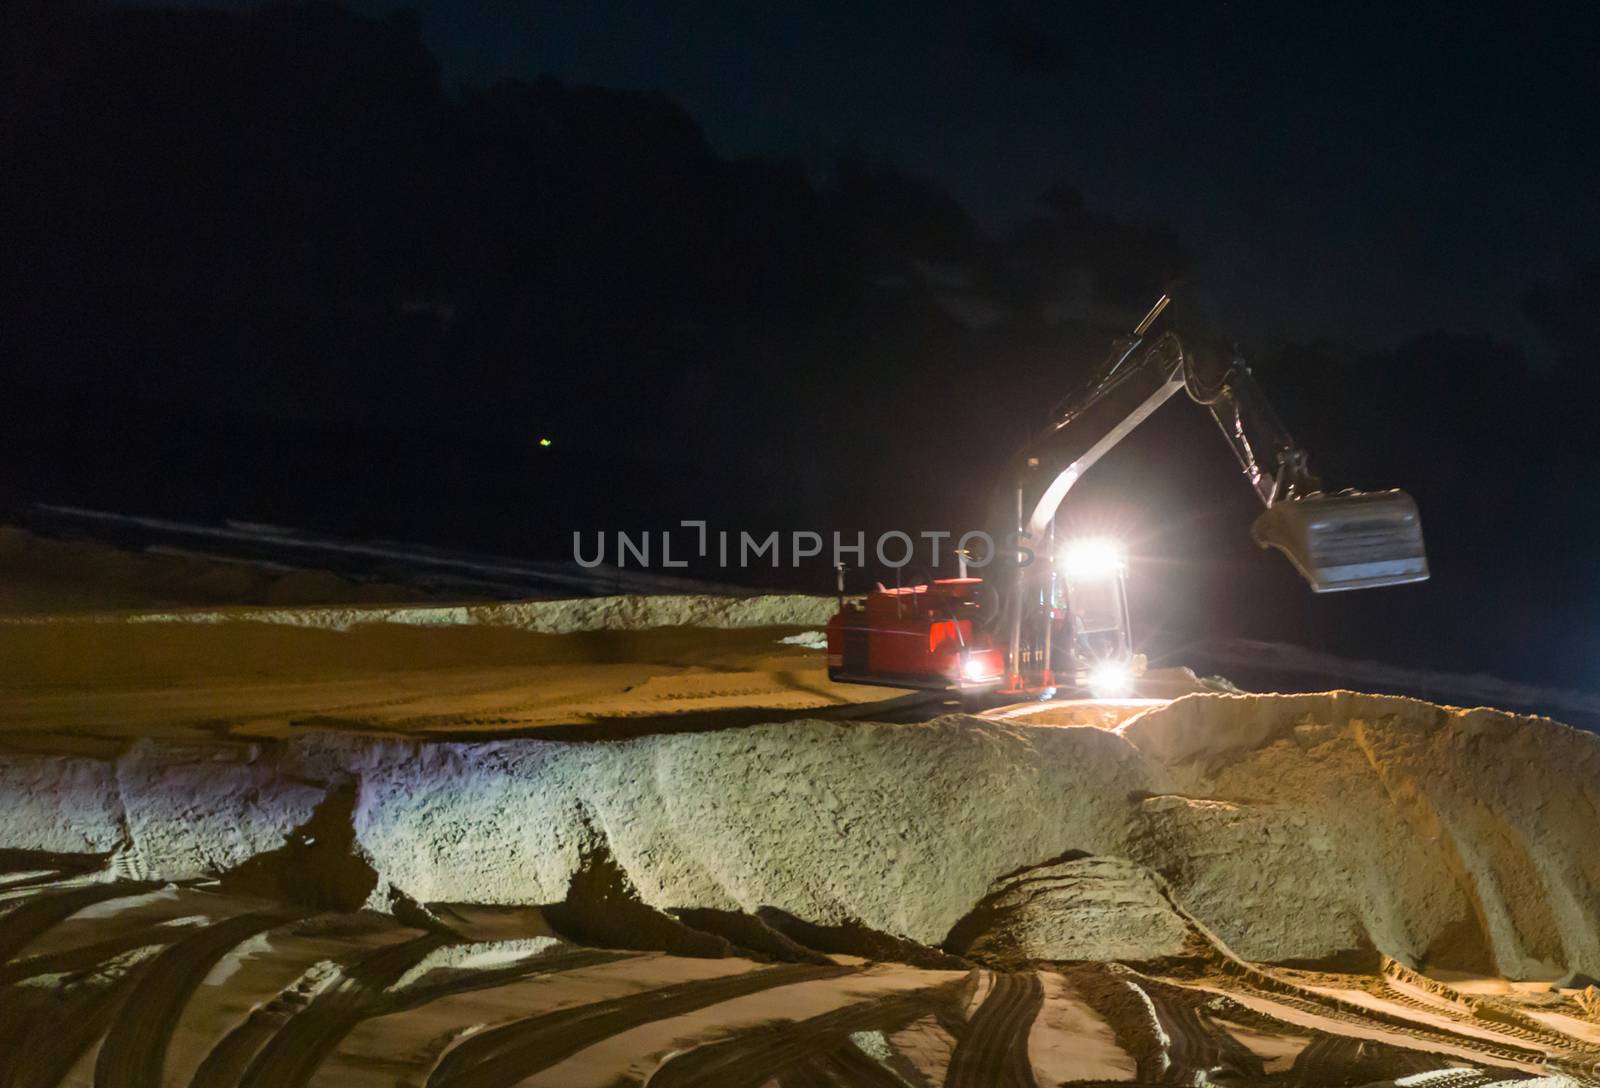 digger excavator working at night time moving the ground at the beach for maintenance by charlottebleijenberg